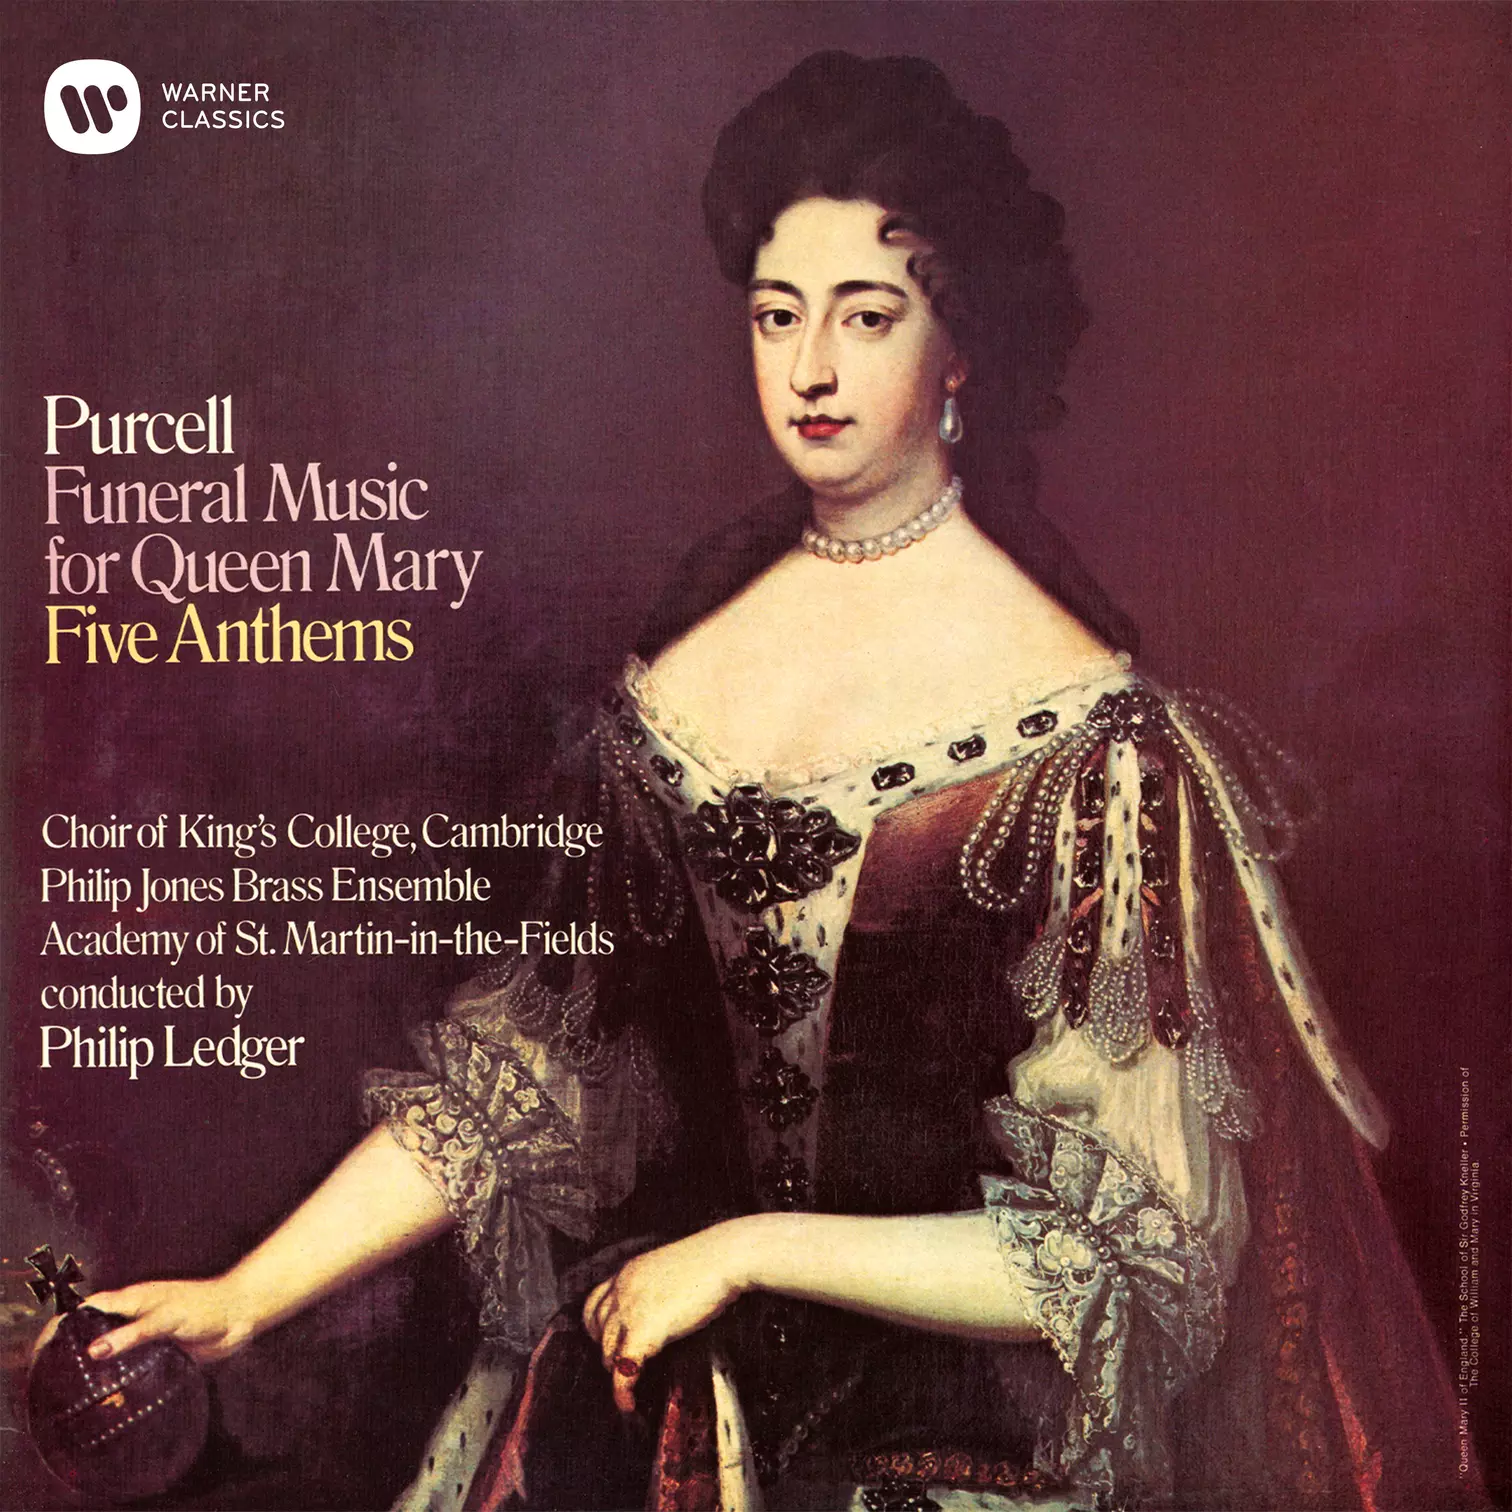 Purcell: Funeral Music for Queen Mary & Anthems